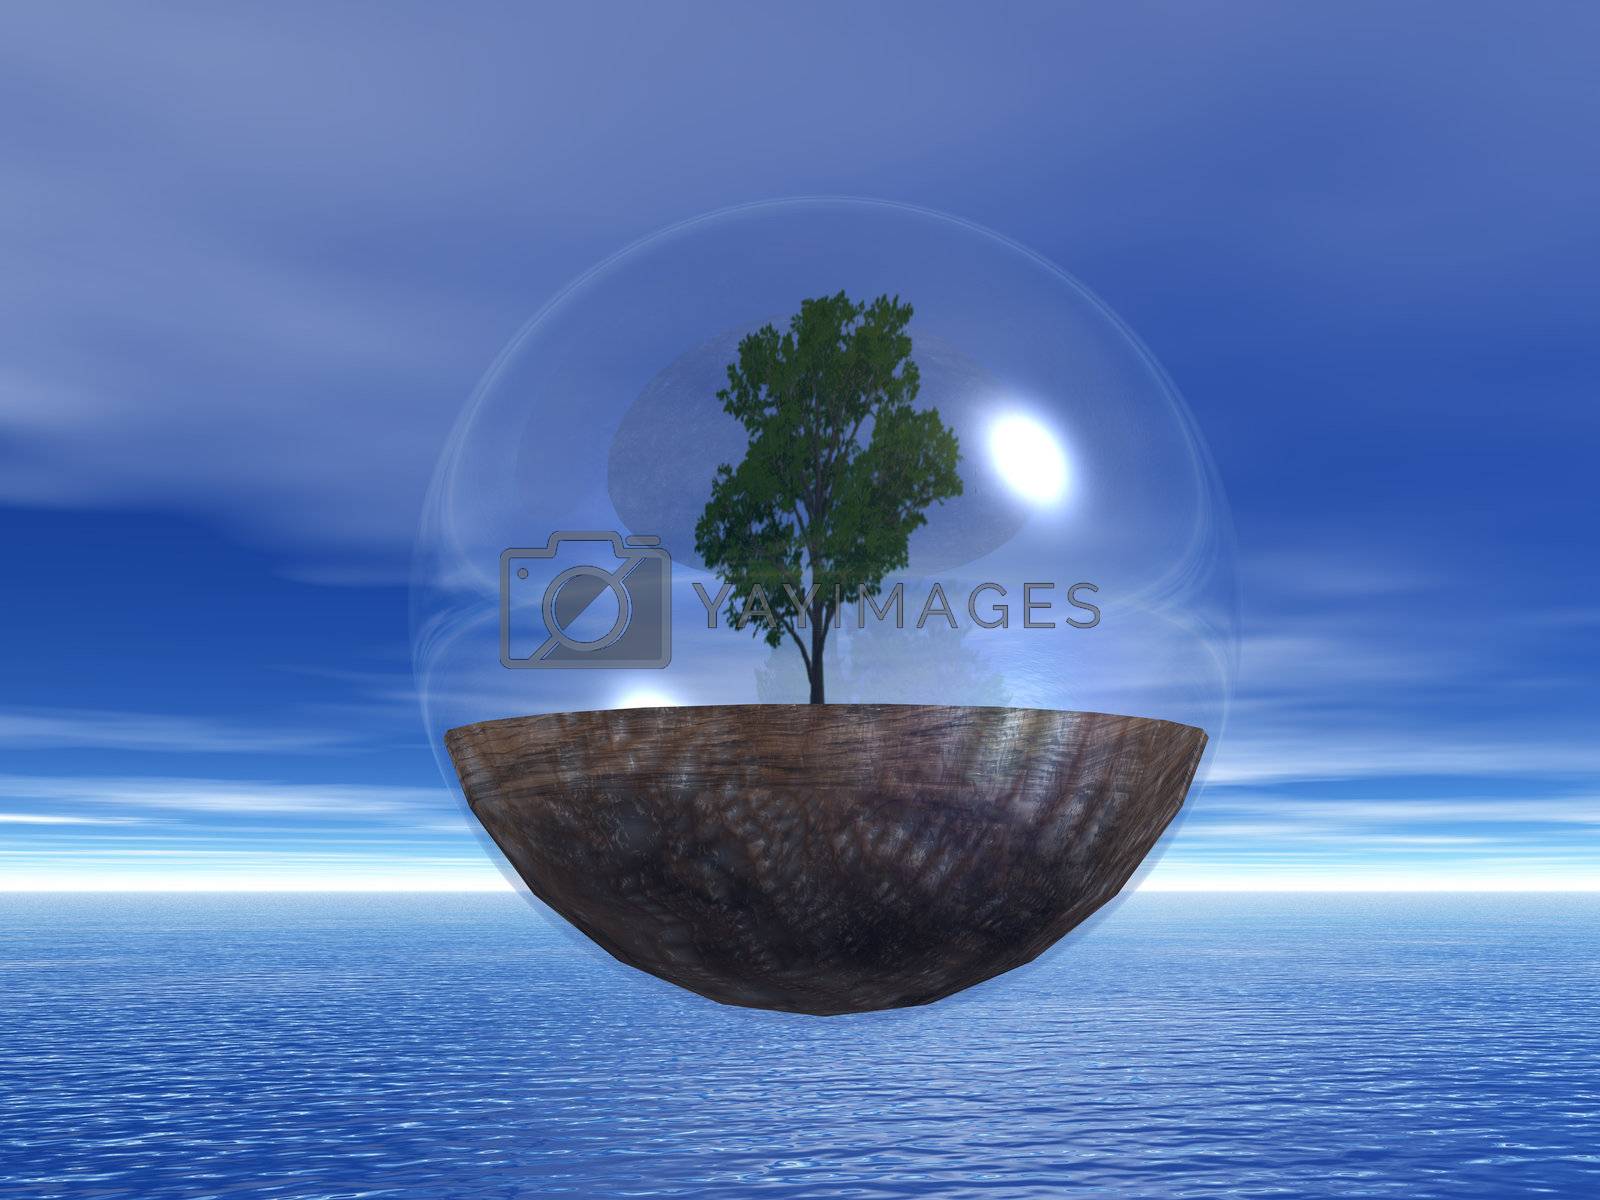 Royalty free image of the last tree by drizzd